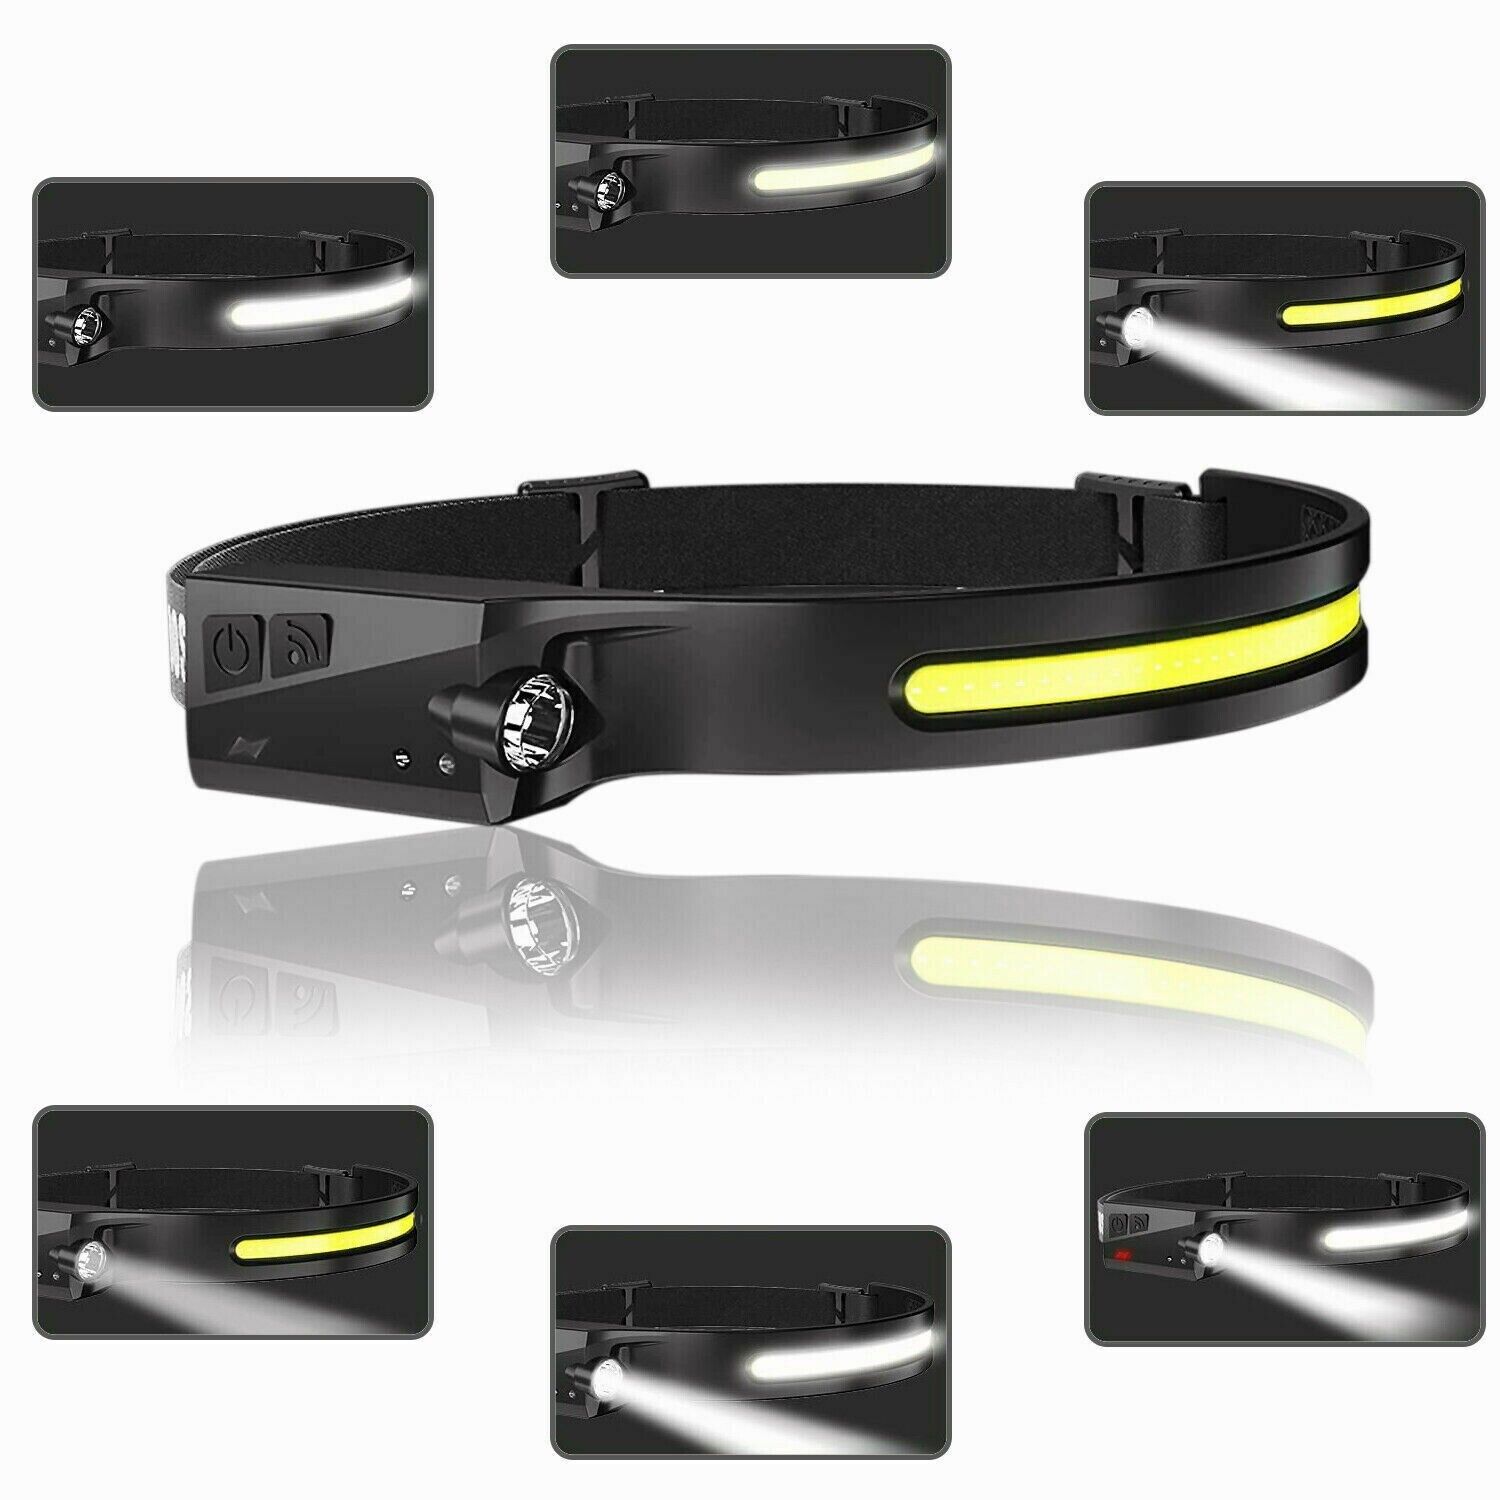 2PACK Headlamp COB LED Rechargeable Headlight Torch Work Light Bar Head Band USB Unbranded Does not apply - фотография #7